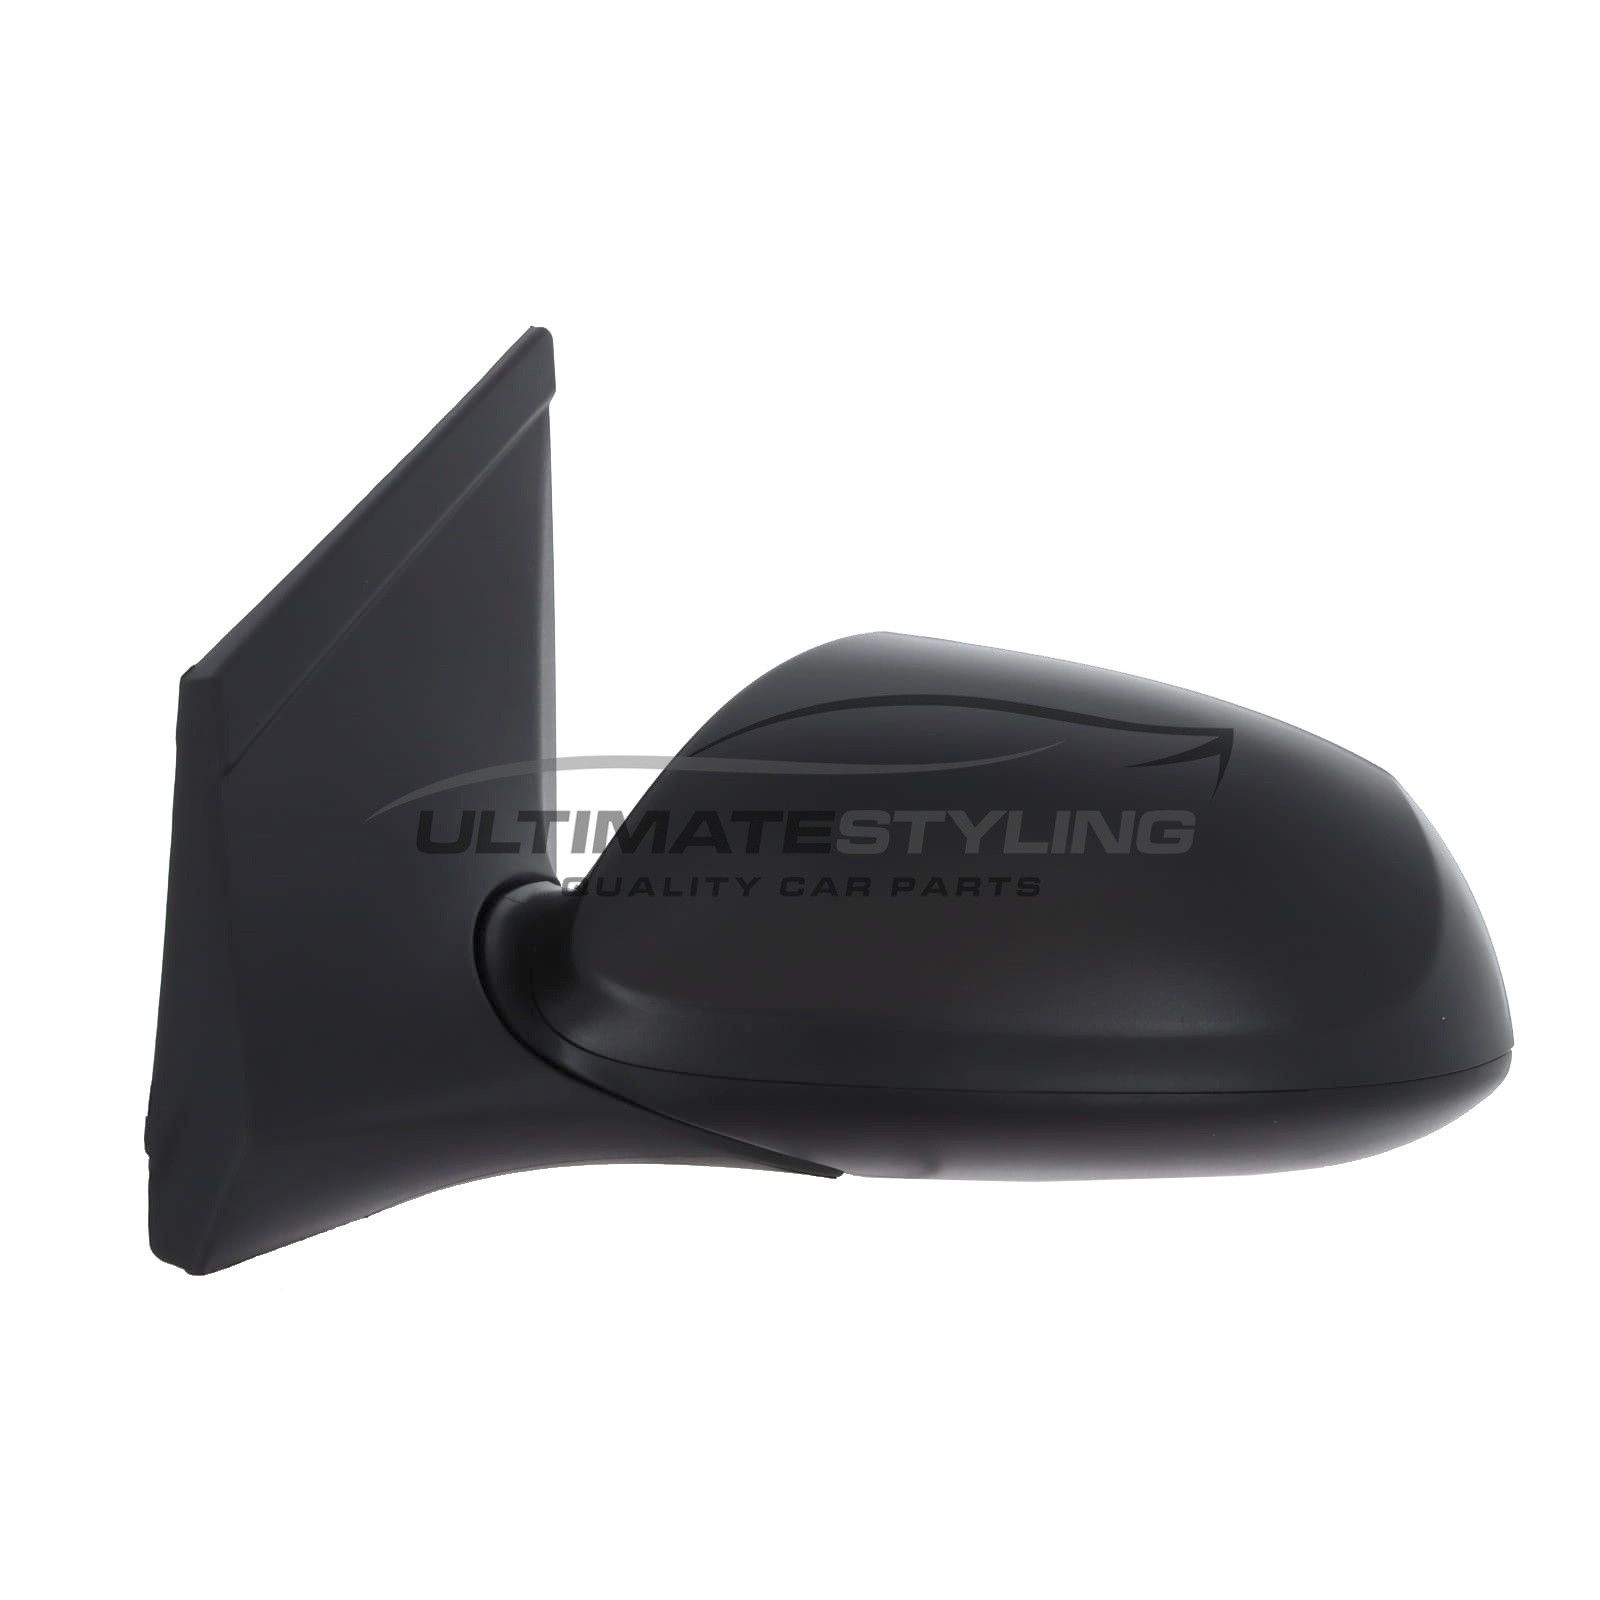 Hyundai i10 Wing Mirror / Door Mirror - Passenger Side (LH) - Cable adjustment - Non-Heated Glass - Black - Textured